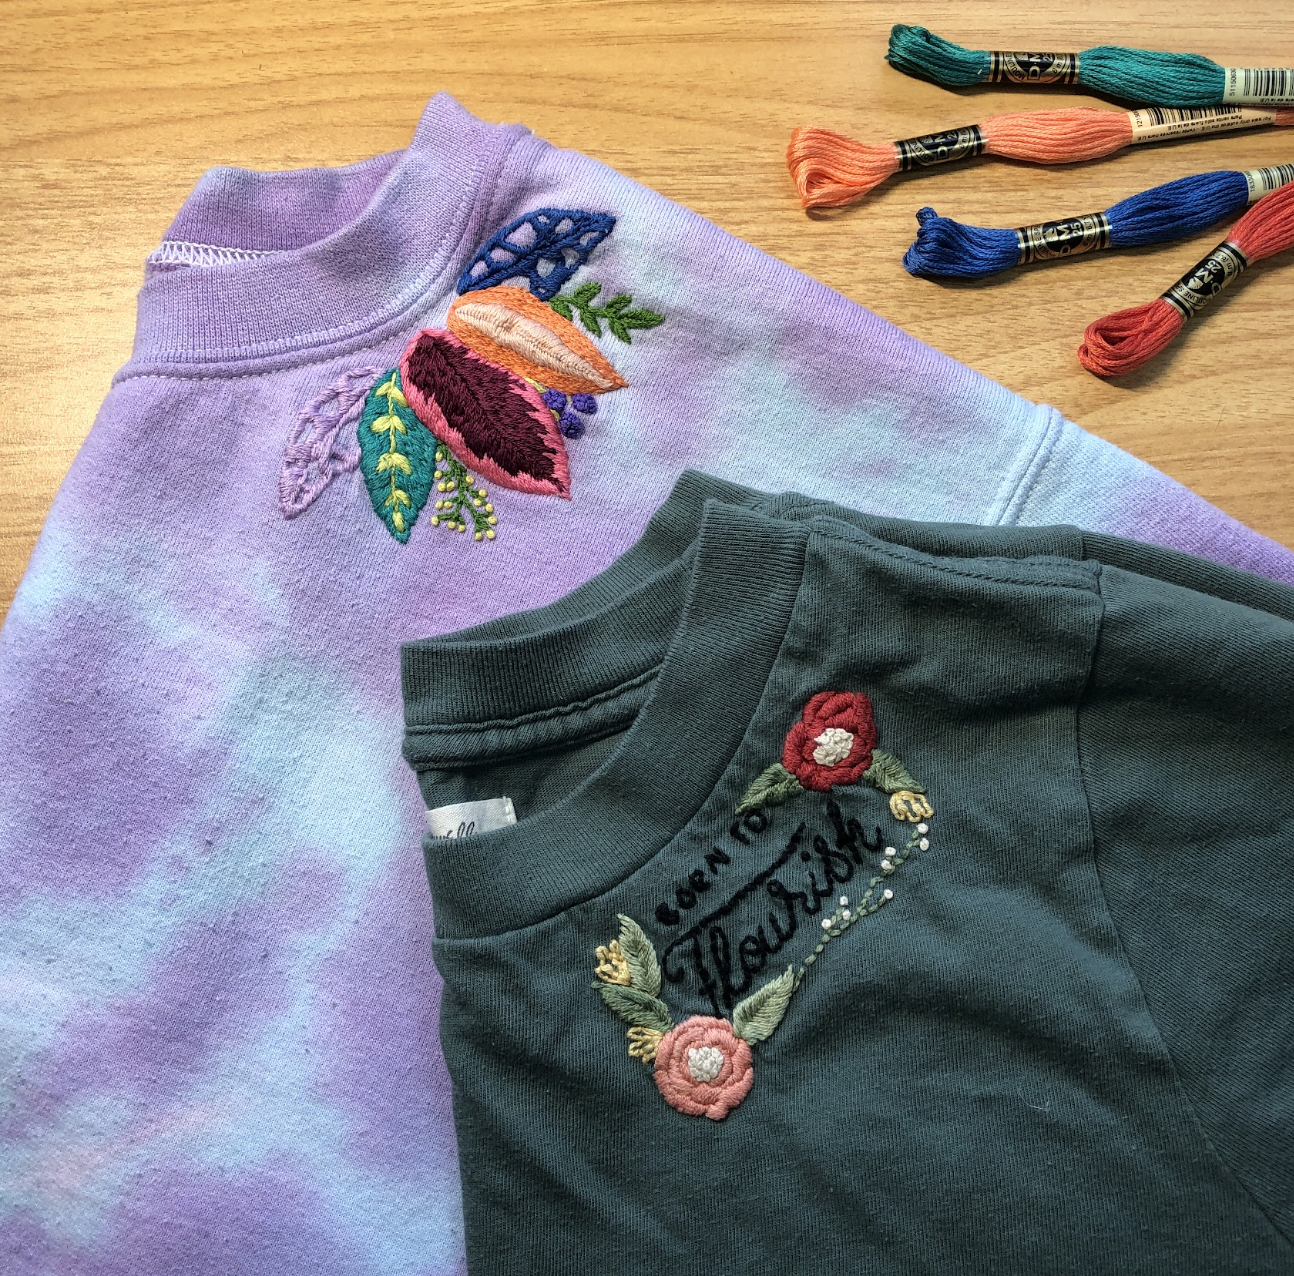 EMBROIDERY CLASS: Embroider Your Clothing